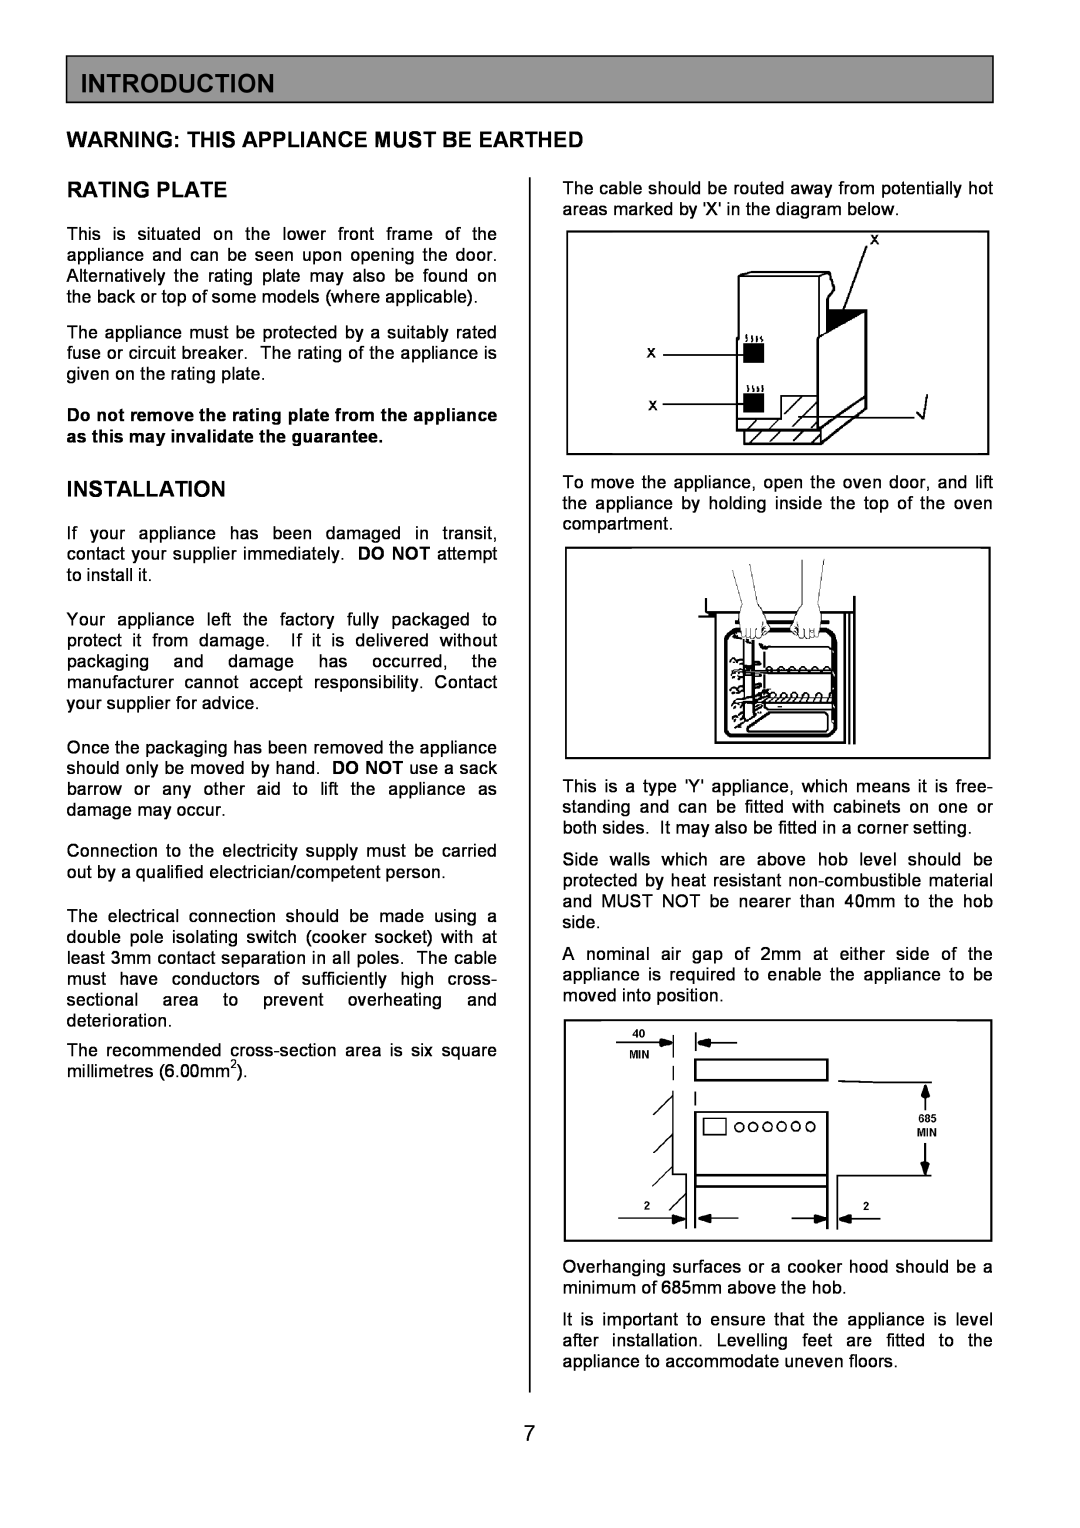 Tricity Bendix SB416 Introduction, Warning This Appliance Must Be Earthed, Rating Plate, Installation 